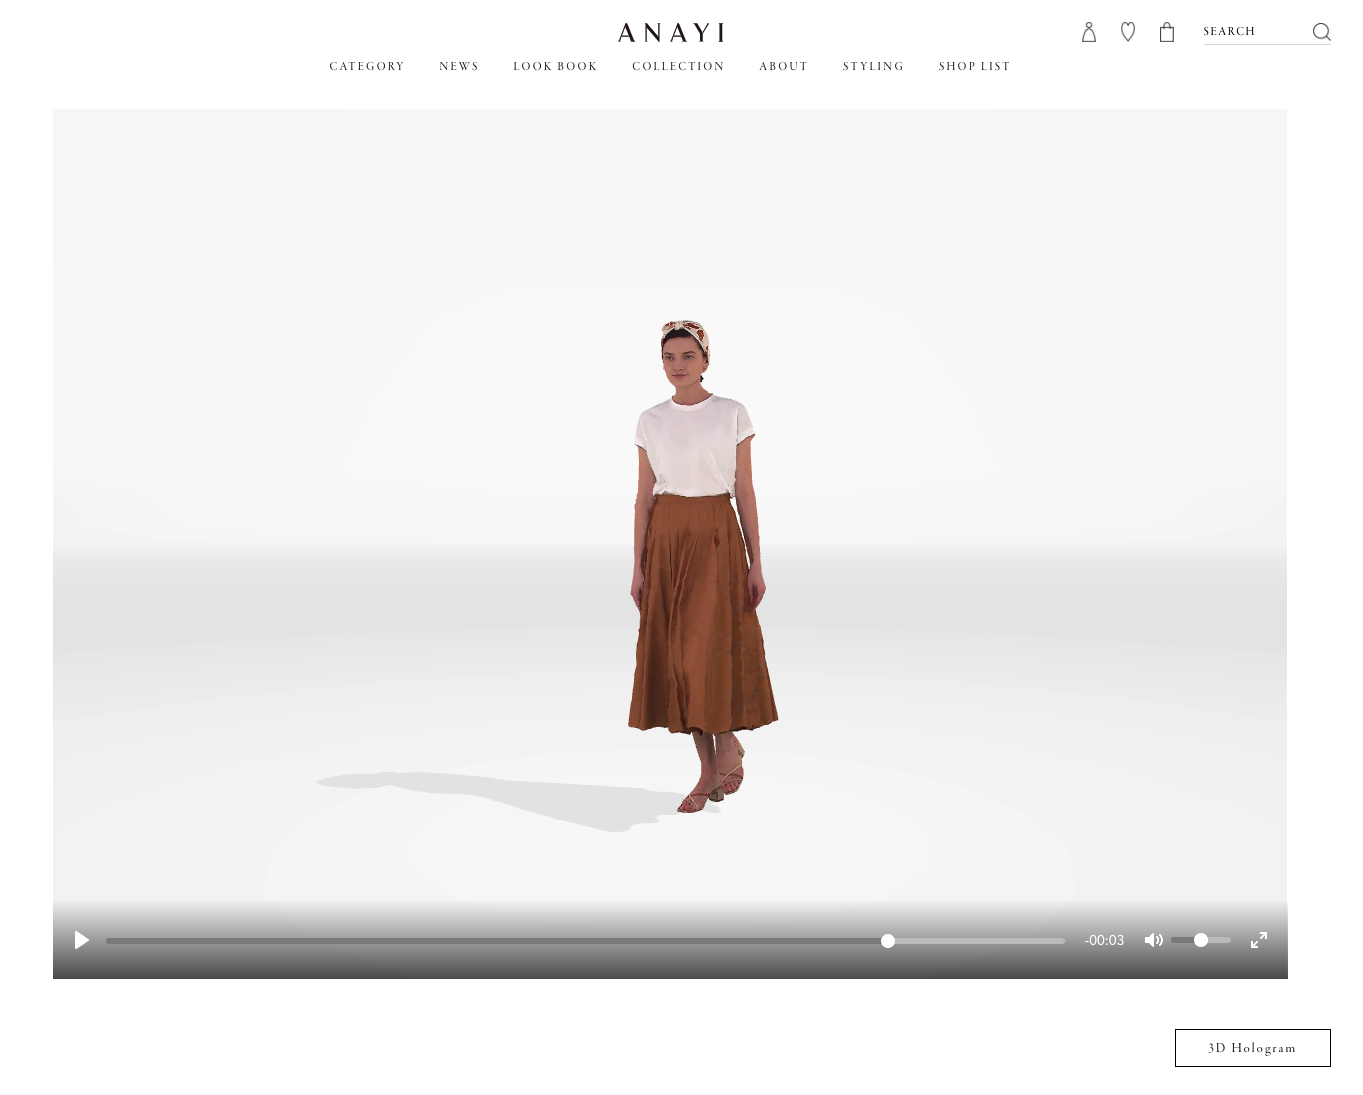 Japanese clothing brand ANAYI updates its ecommerce site with a new 3D/AR feature to boost shopper confidence